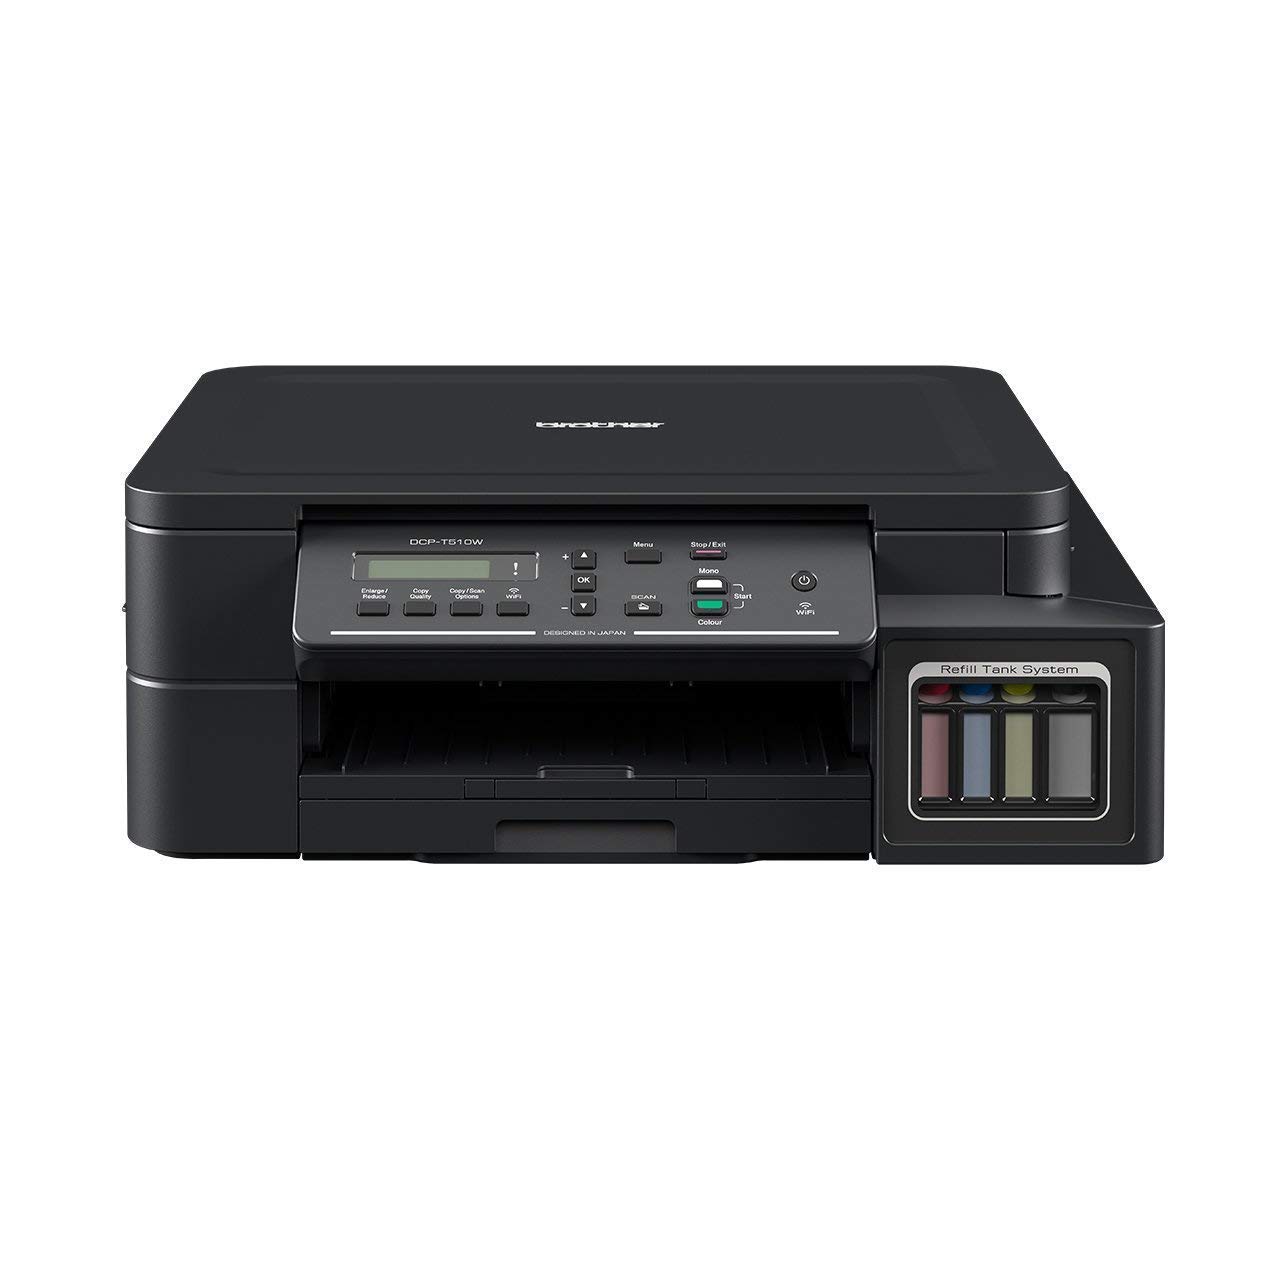 Brother DCP-T510W Inktank Refill System Printer with Built-in-Wireless Technology